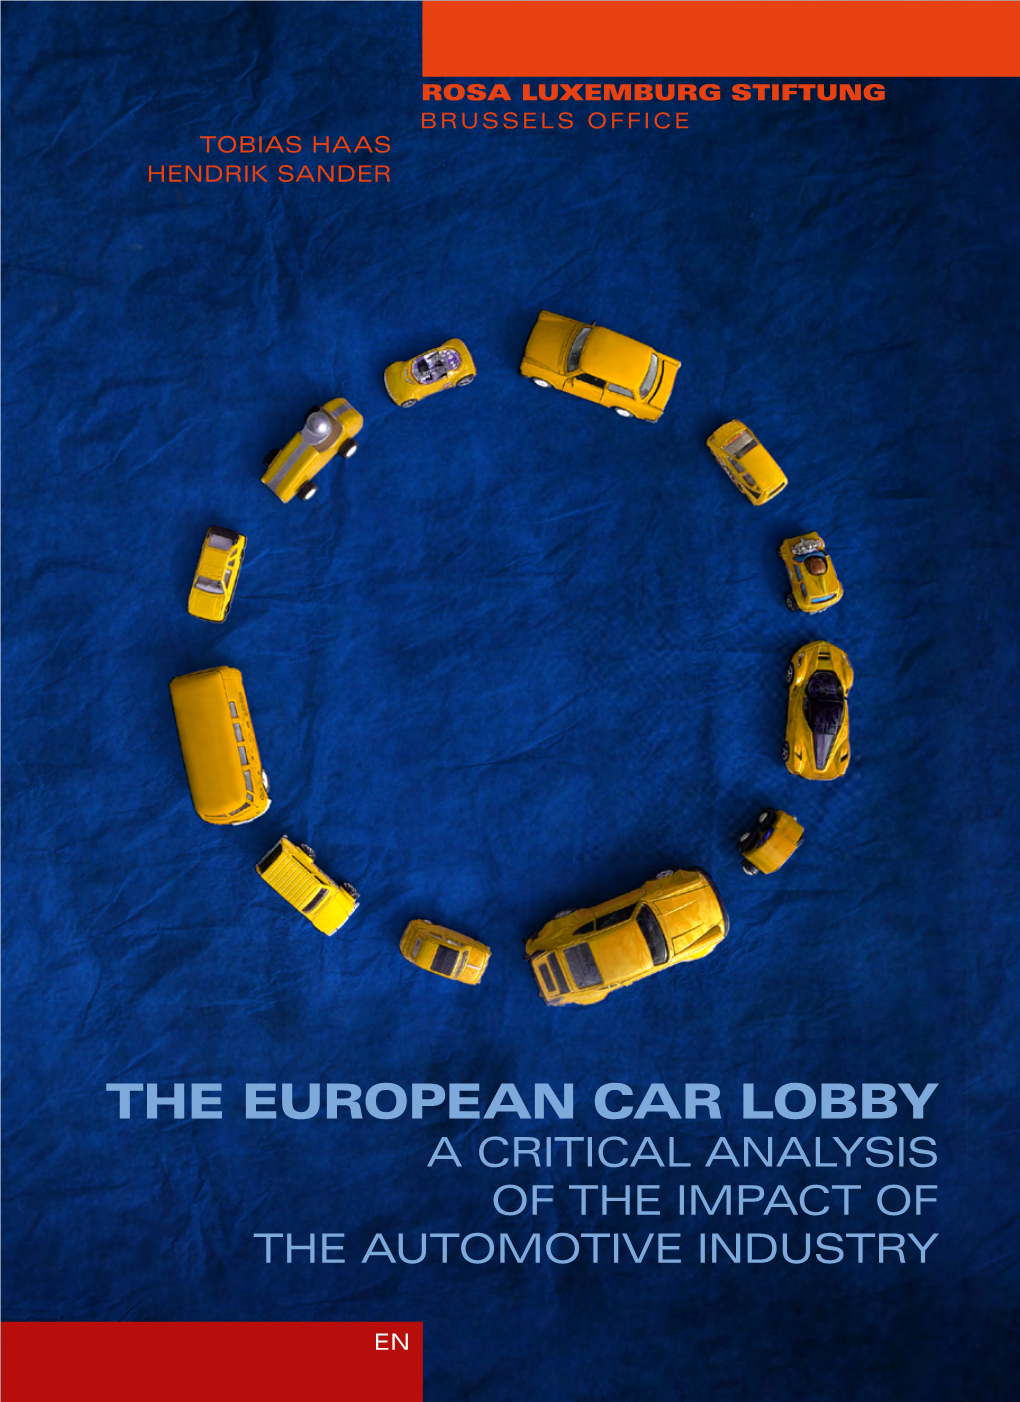 The European Car Lobby a Critical Analysis of the Impact of the Automotive Industry